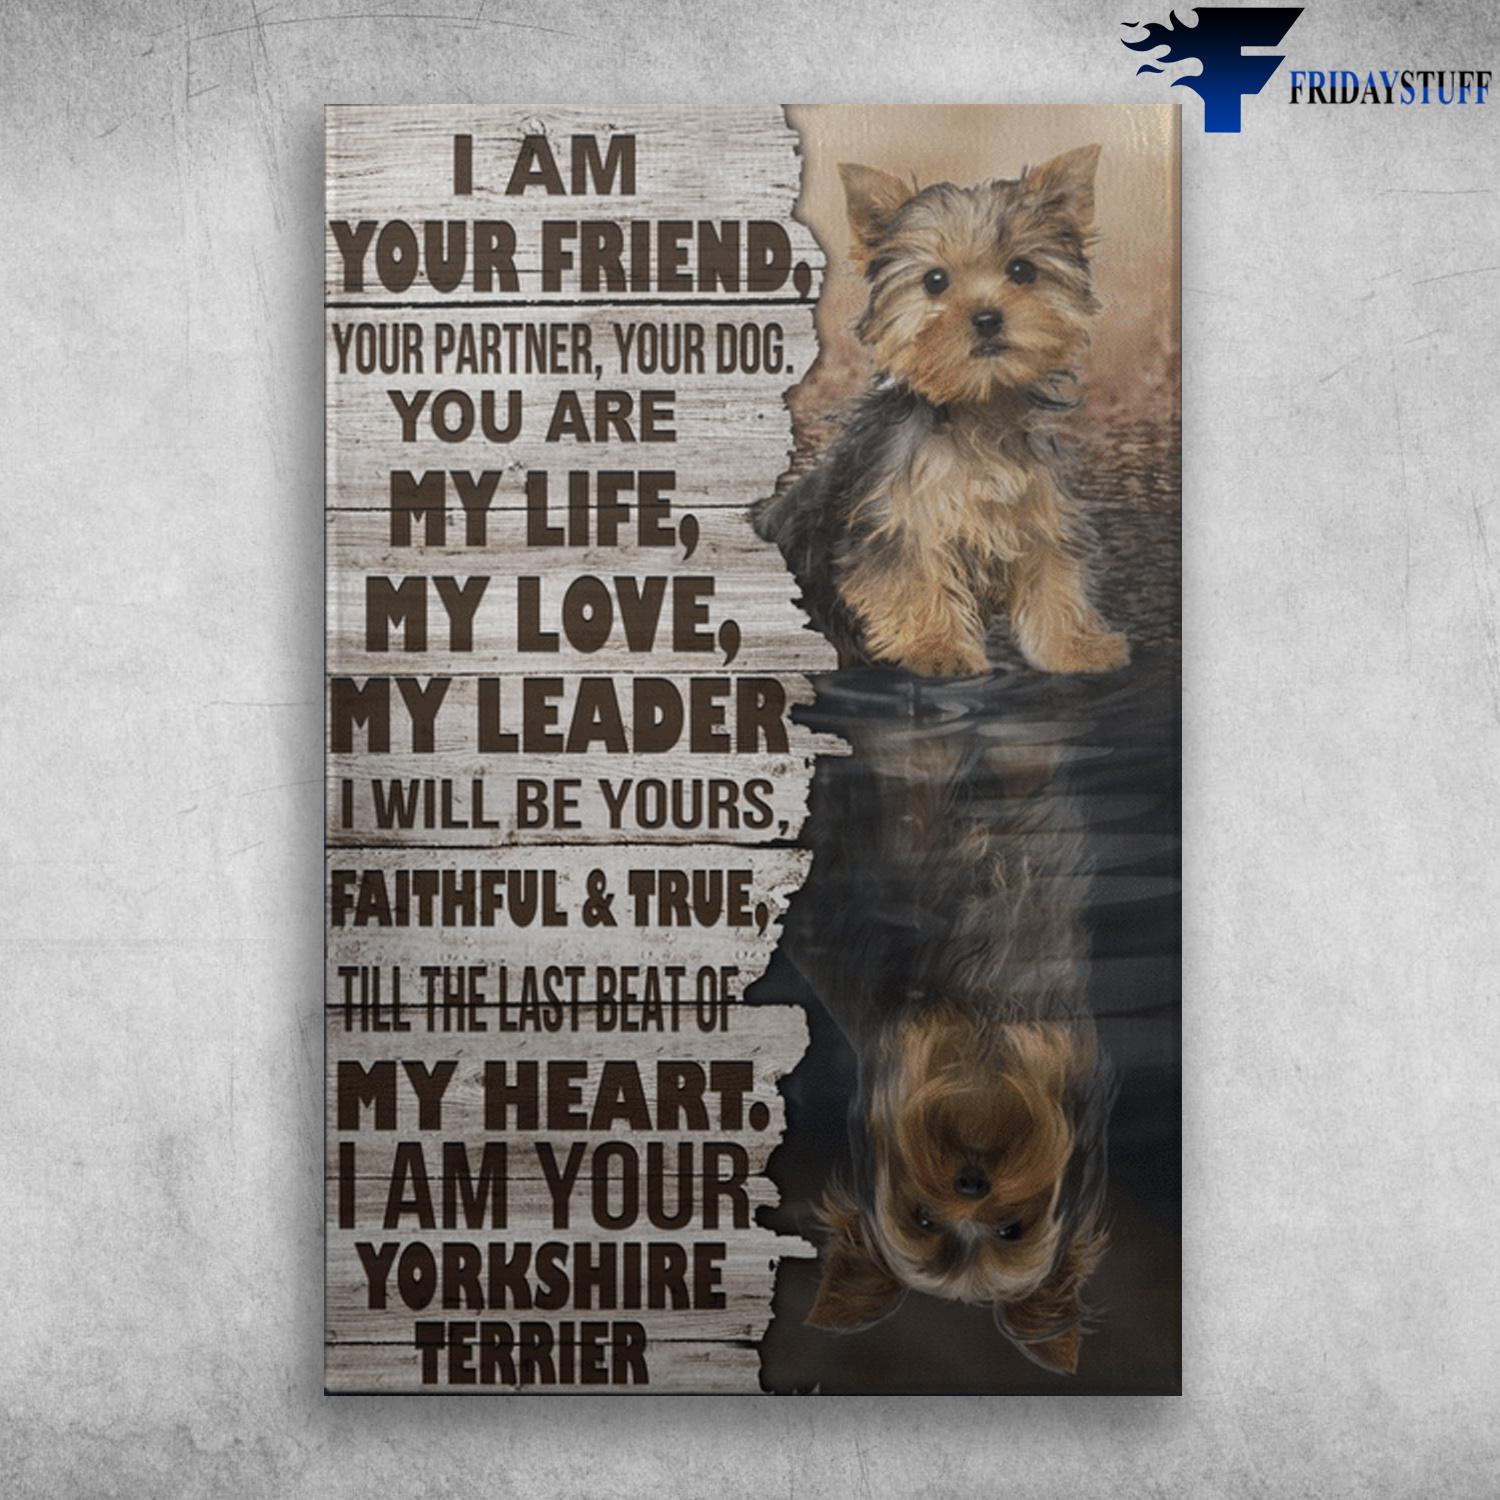 Yorkshire Terrier - I Am Your Friend, Your Partner, Your Dog, You Are My Life, My Love, My Leader, I Will Be Yours, Faithful And True, Till The Last Beat Of My Heart, I Am Your Yorkshire Terrier